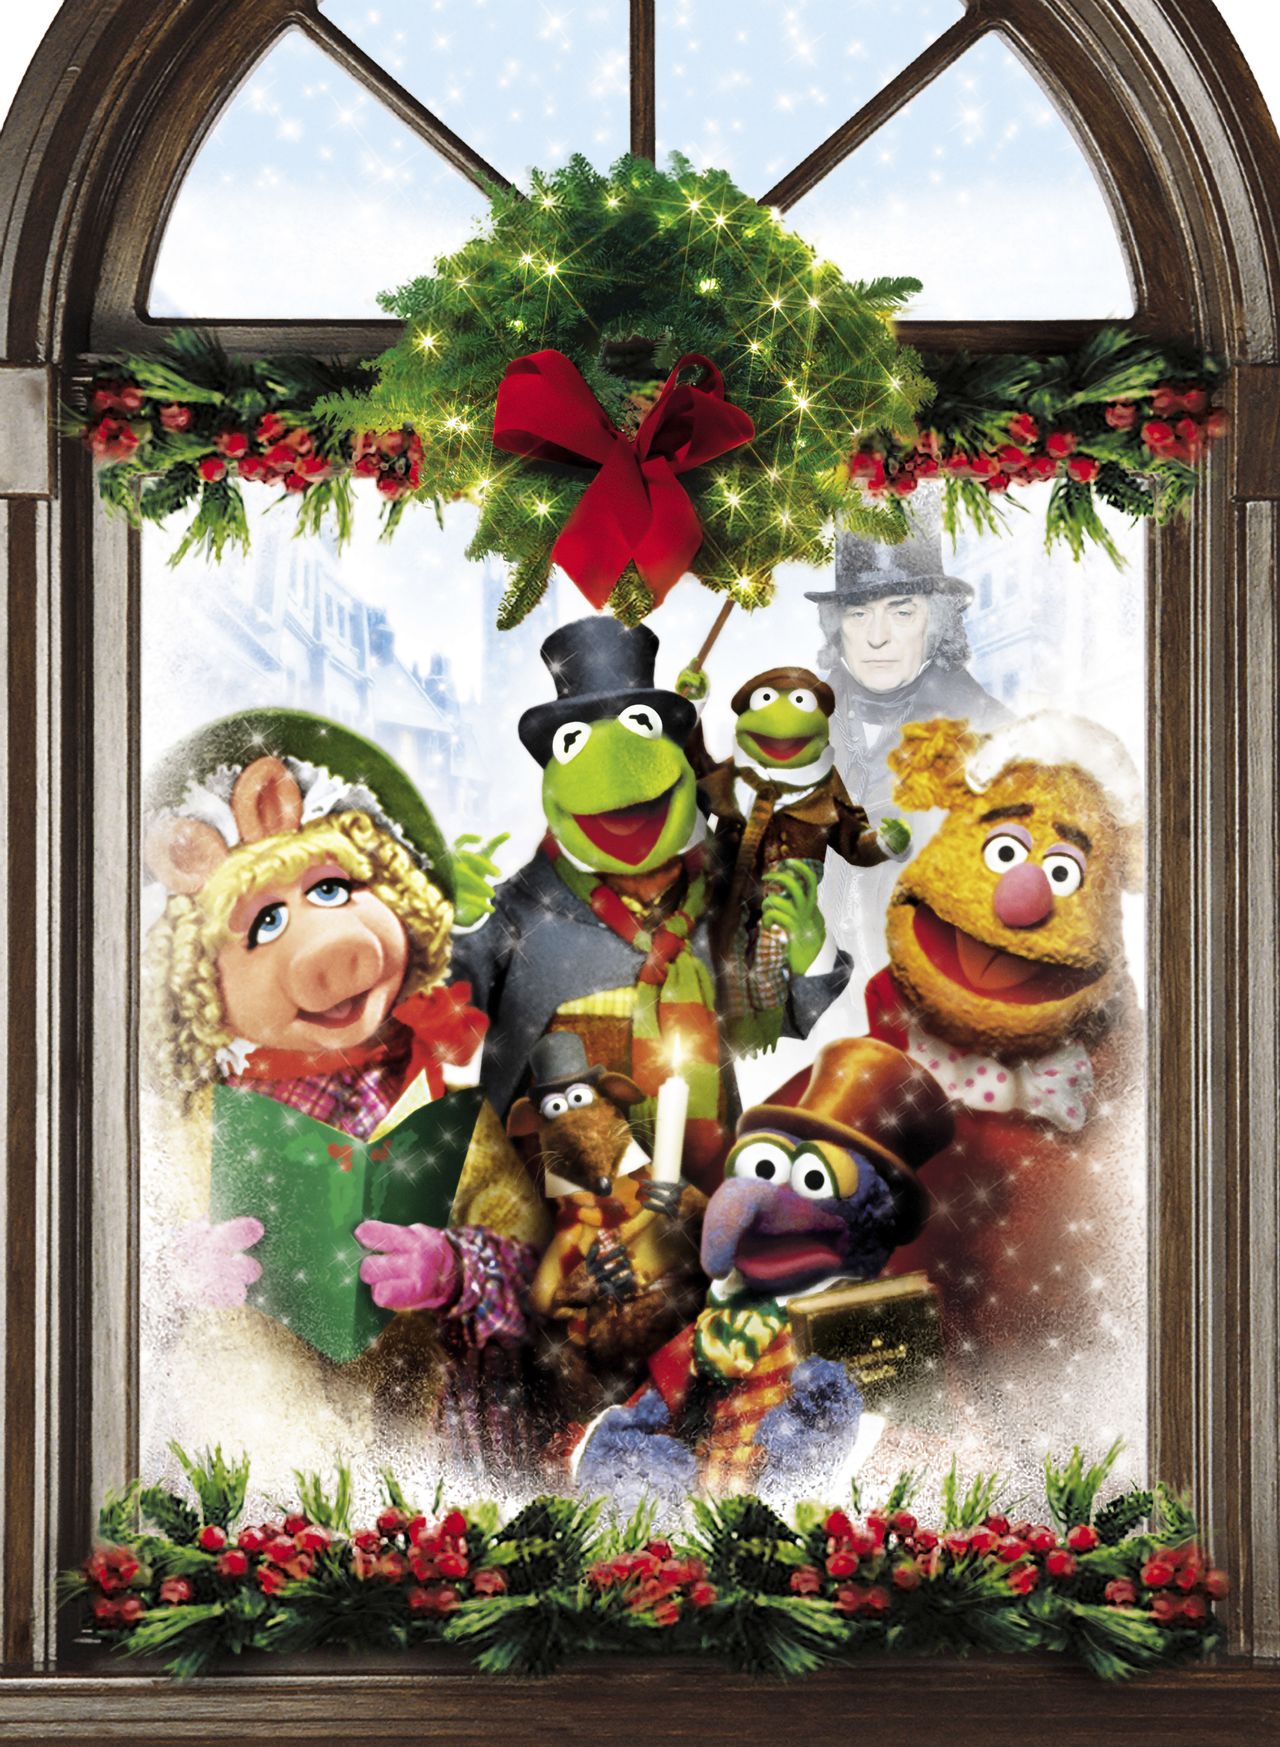 Christmas just wouldn't be Christmas without the Muppets